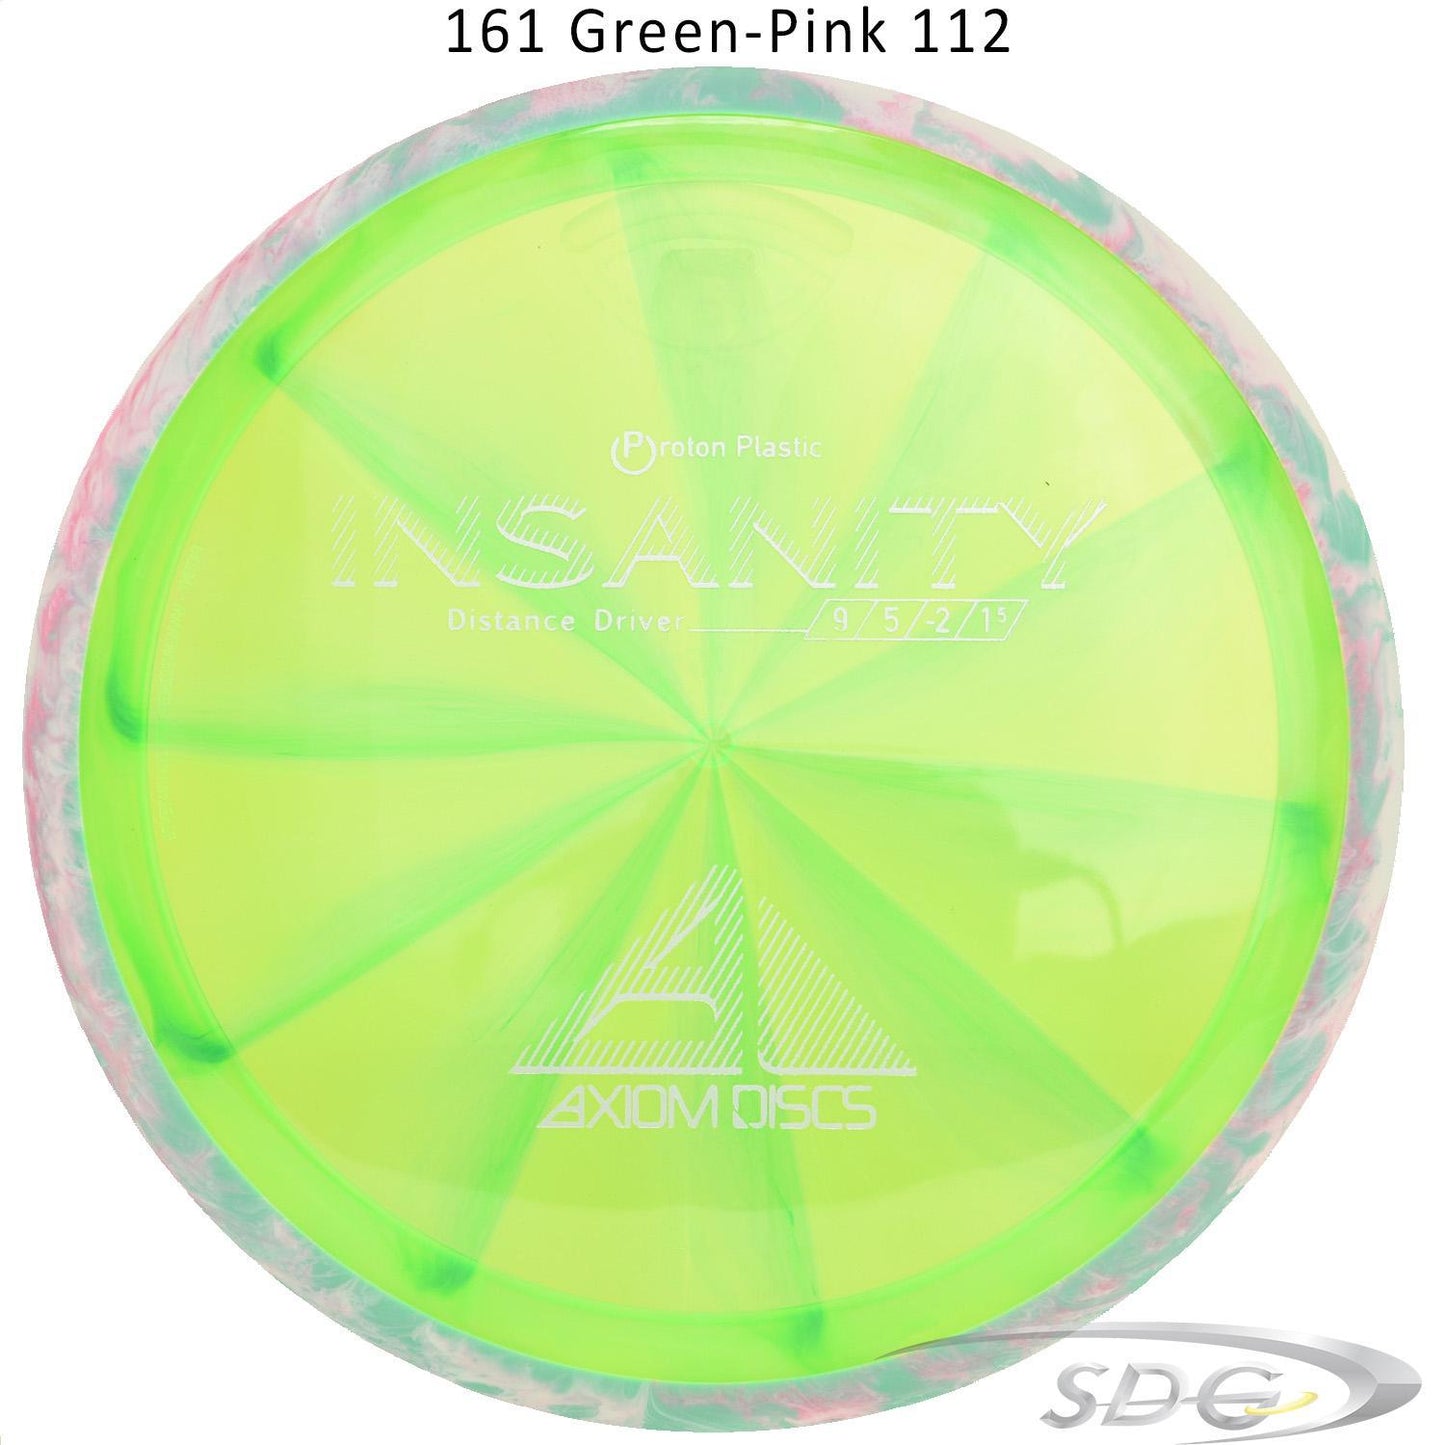 axiom-proton-insanity-disc-golf-distance-driver 161 Green-Pink 112